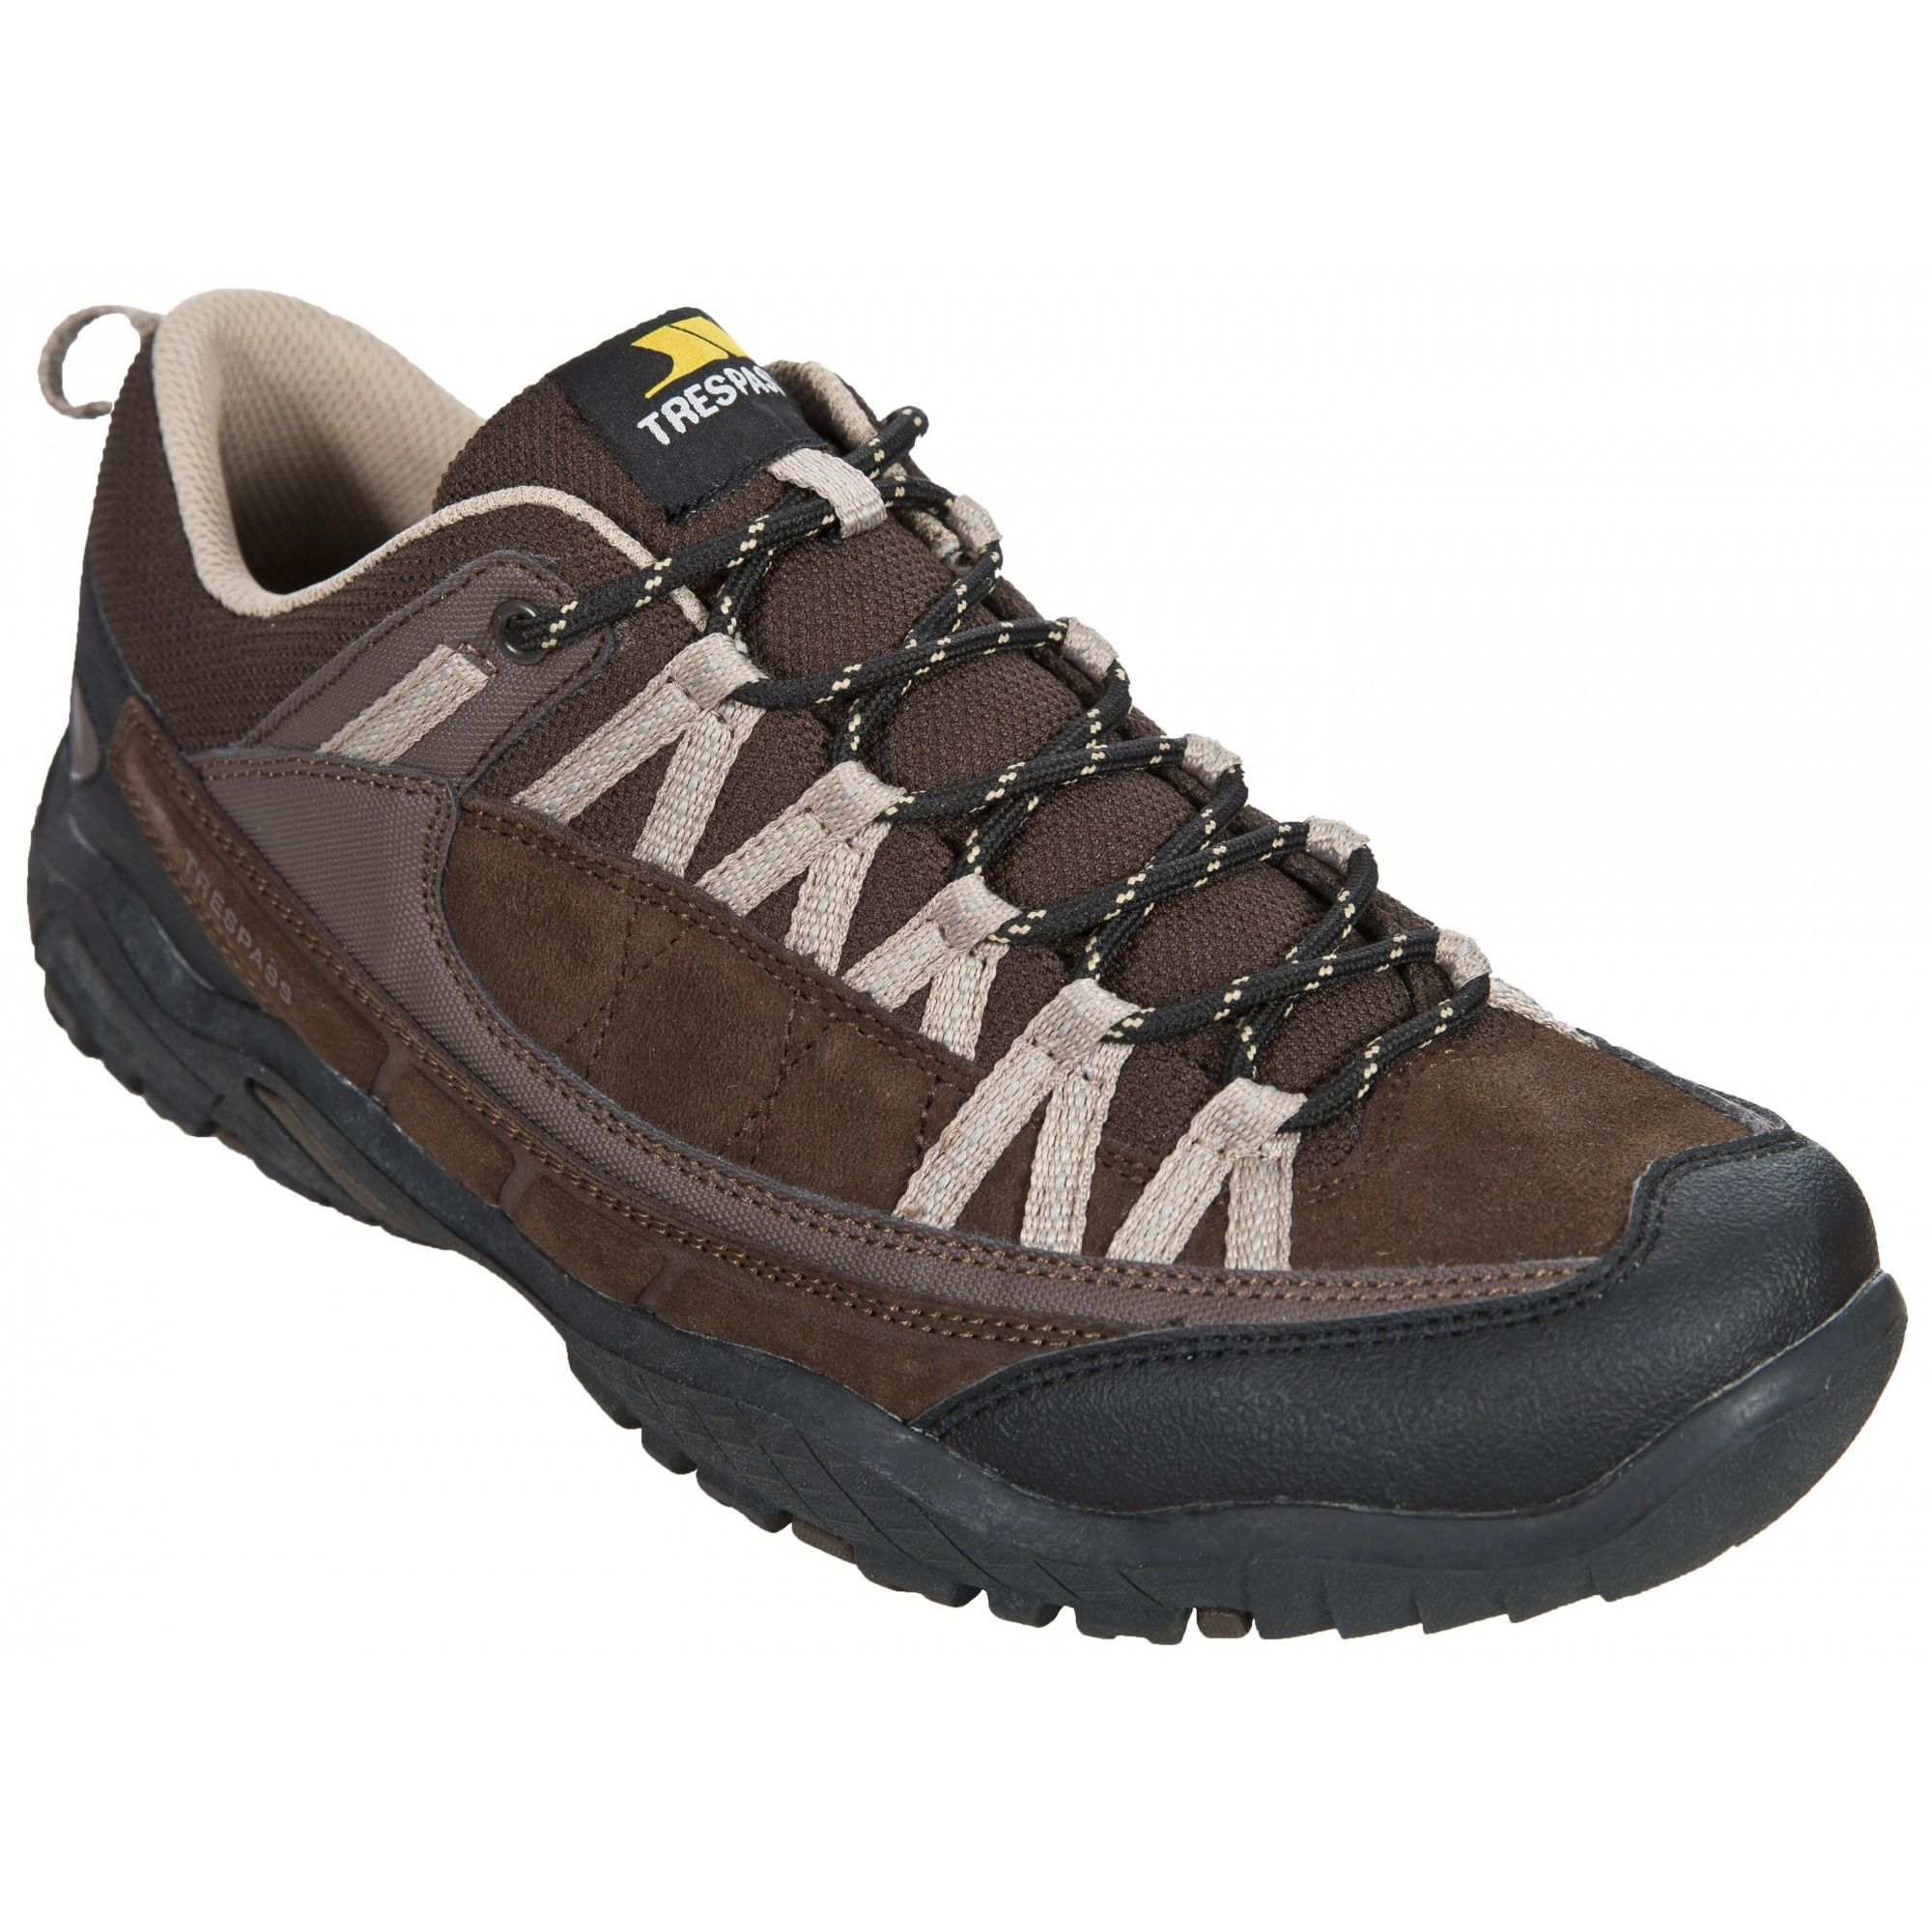 Mens walking lifestyle low. Easy-flow lacing system. Arch stabilising and supportive shank. Cushioned and contoured footbed. Upper: Cow suede/PU/Textile, Lining: Textile, Insole: Moulded EVA, Outsoule: Rubber.